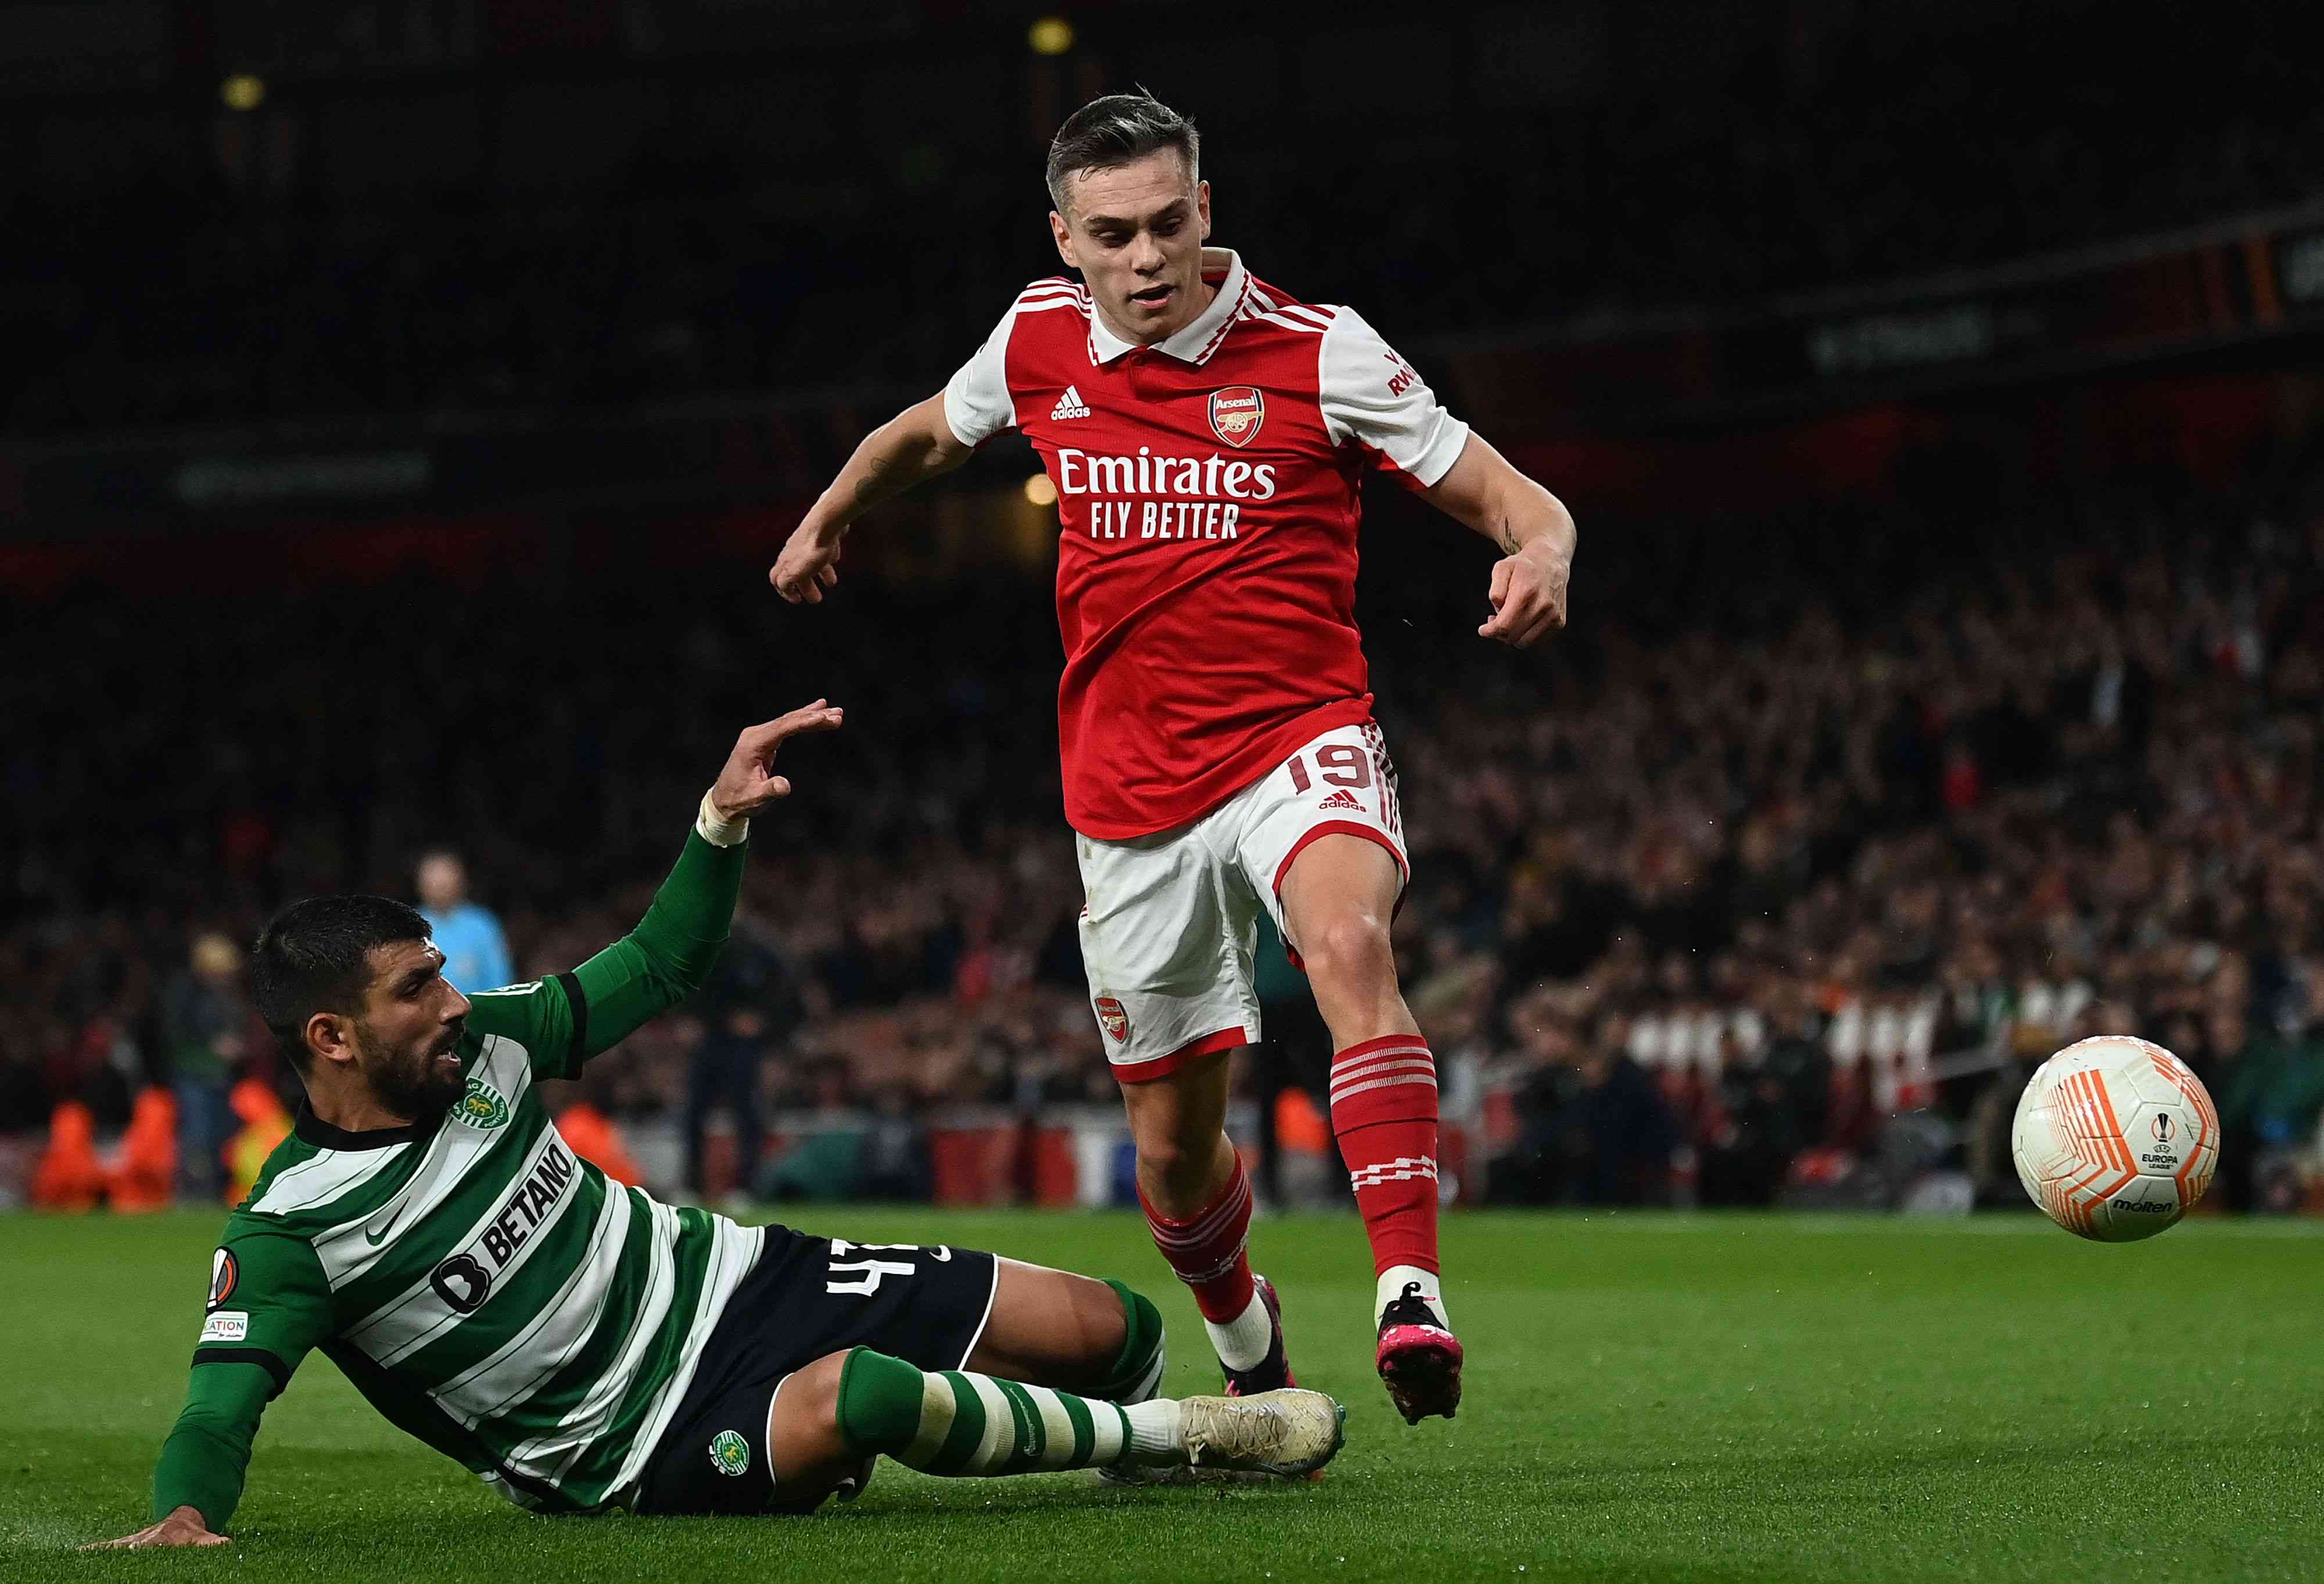 Arsenal out of Europa League as Man United advances to quarterfinals